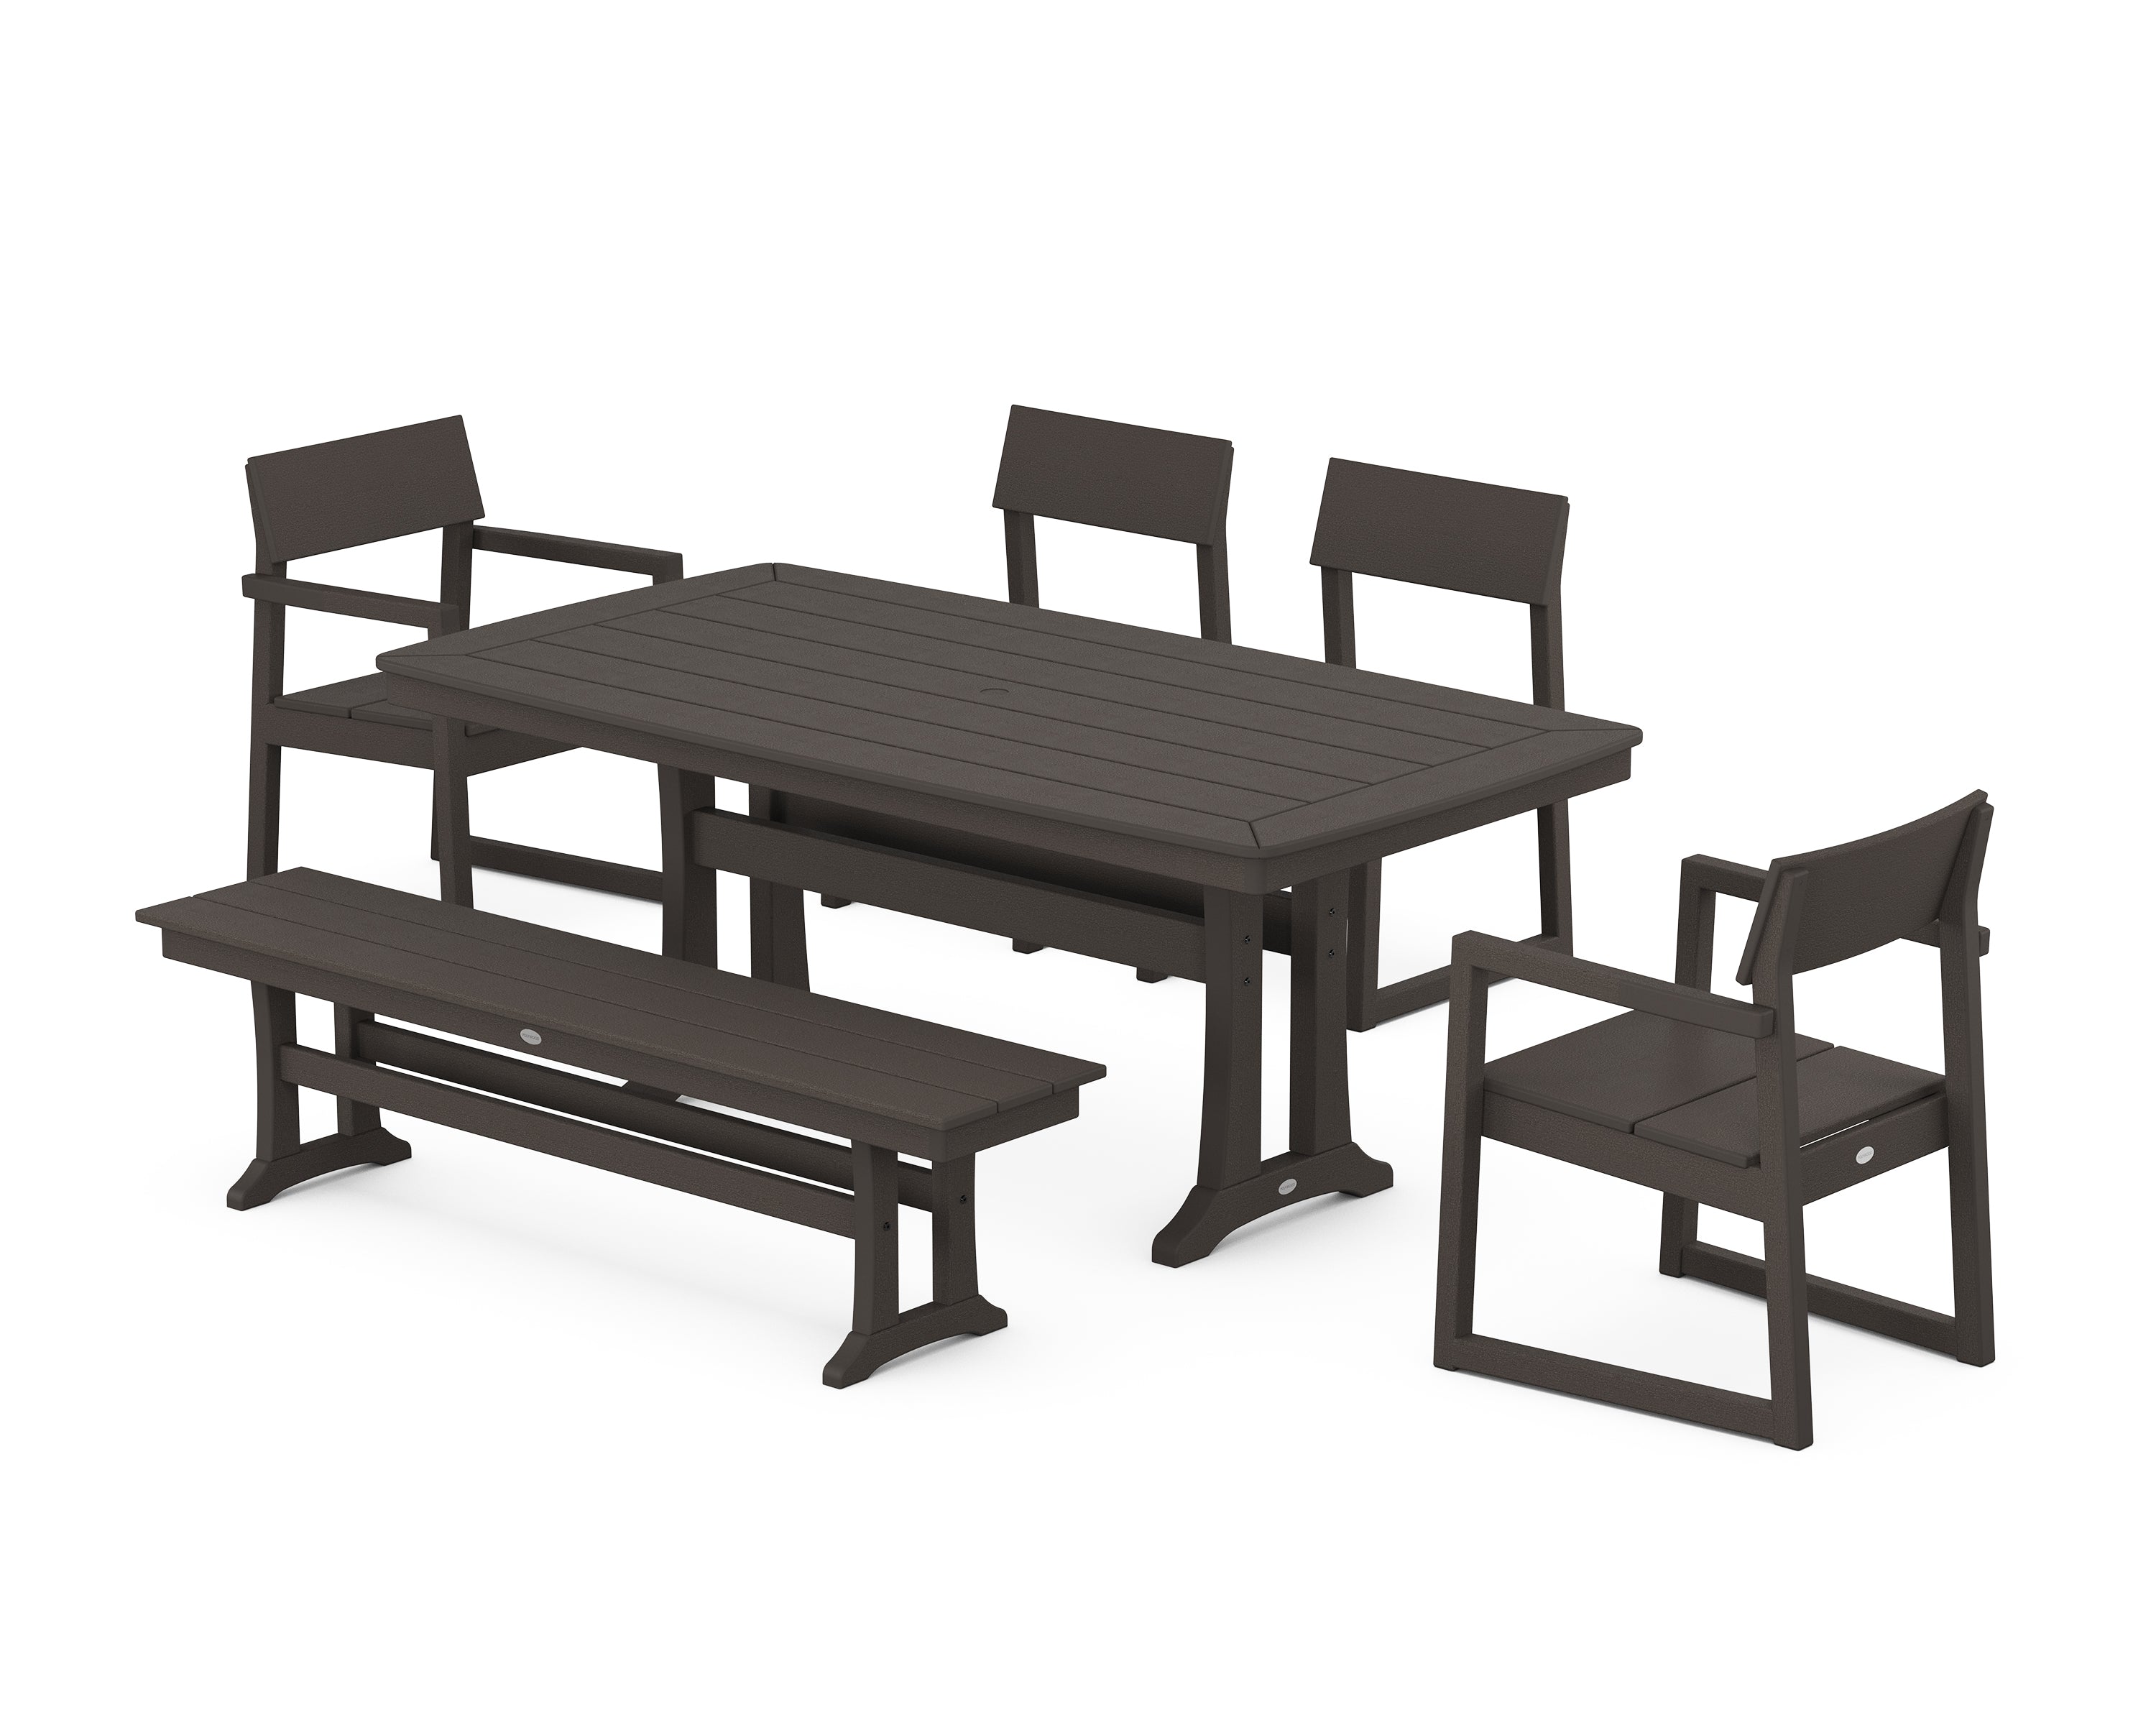 POLYWOOD® EDGE 6-Piece Dining Set with Trestle Legs in Vintage Coffee